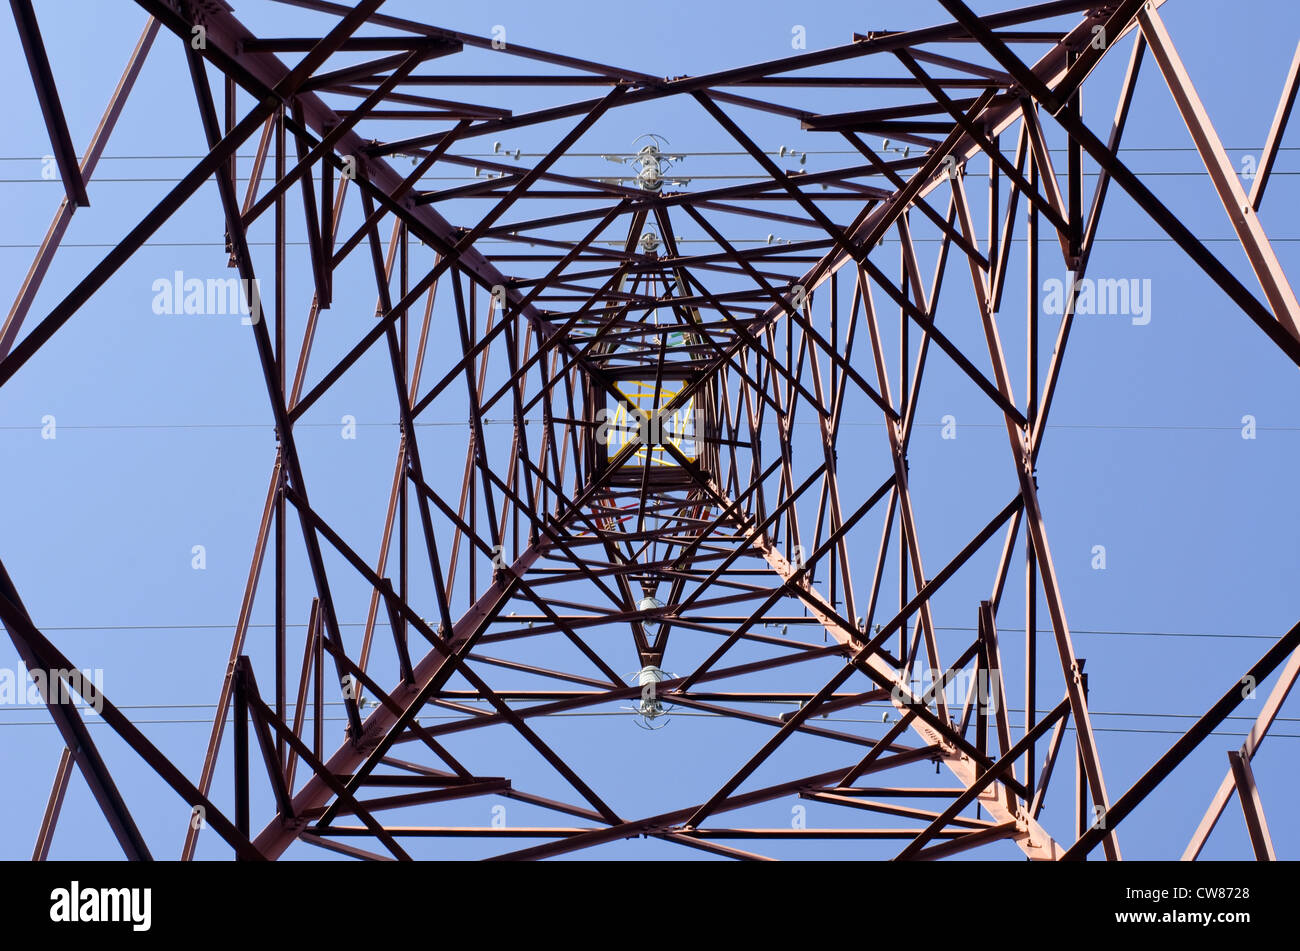 Transmission tower as seen from below towards a blue sky Stock Photo